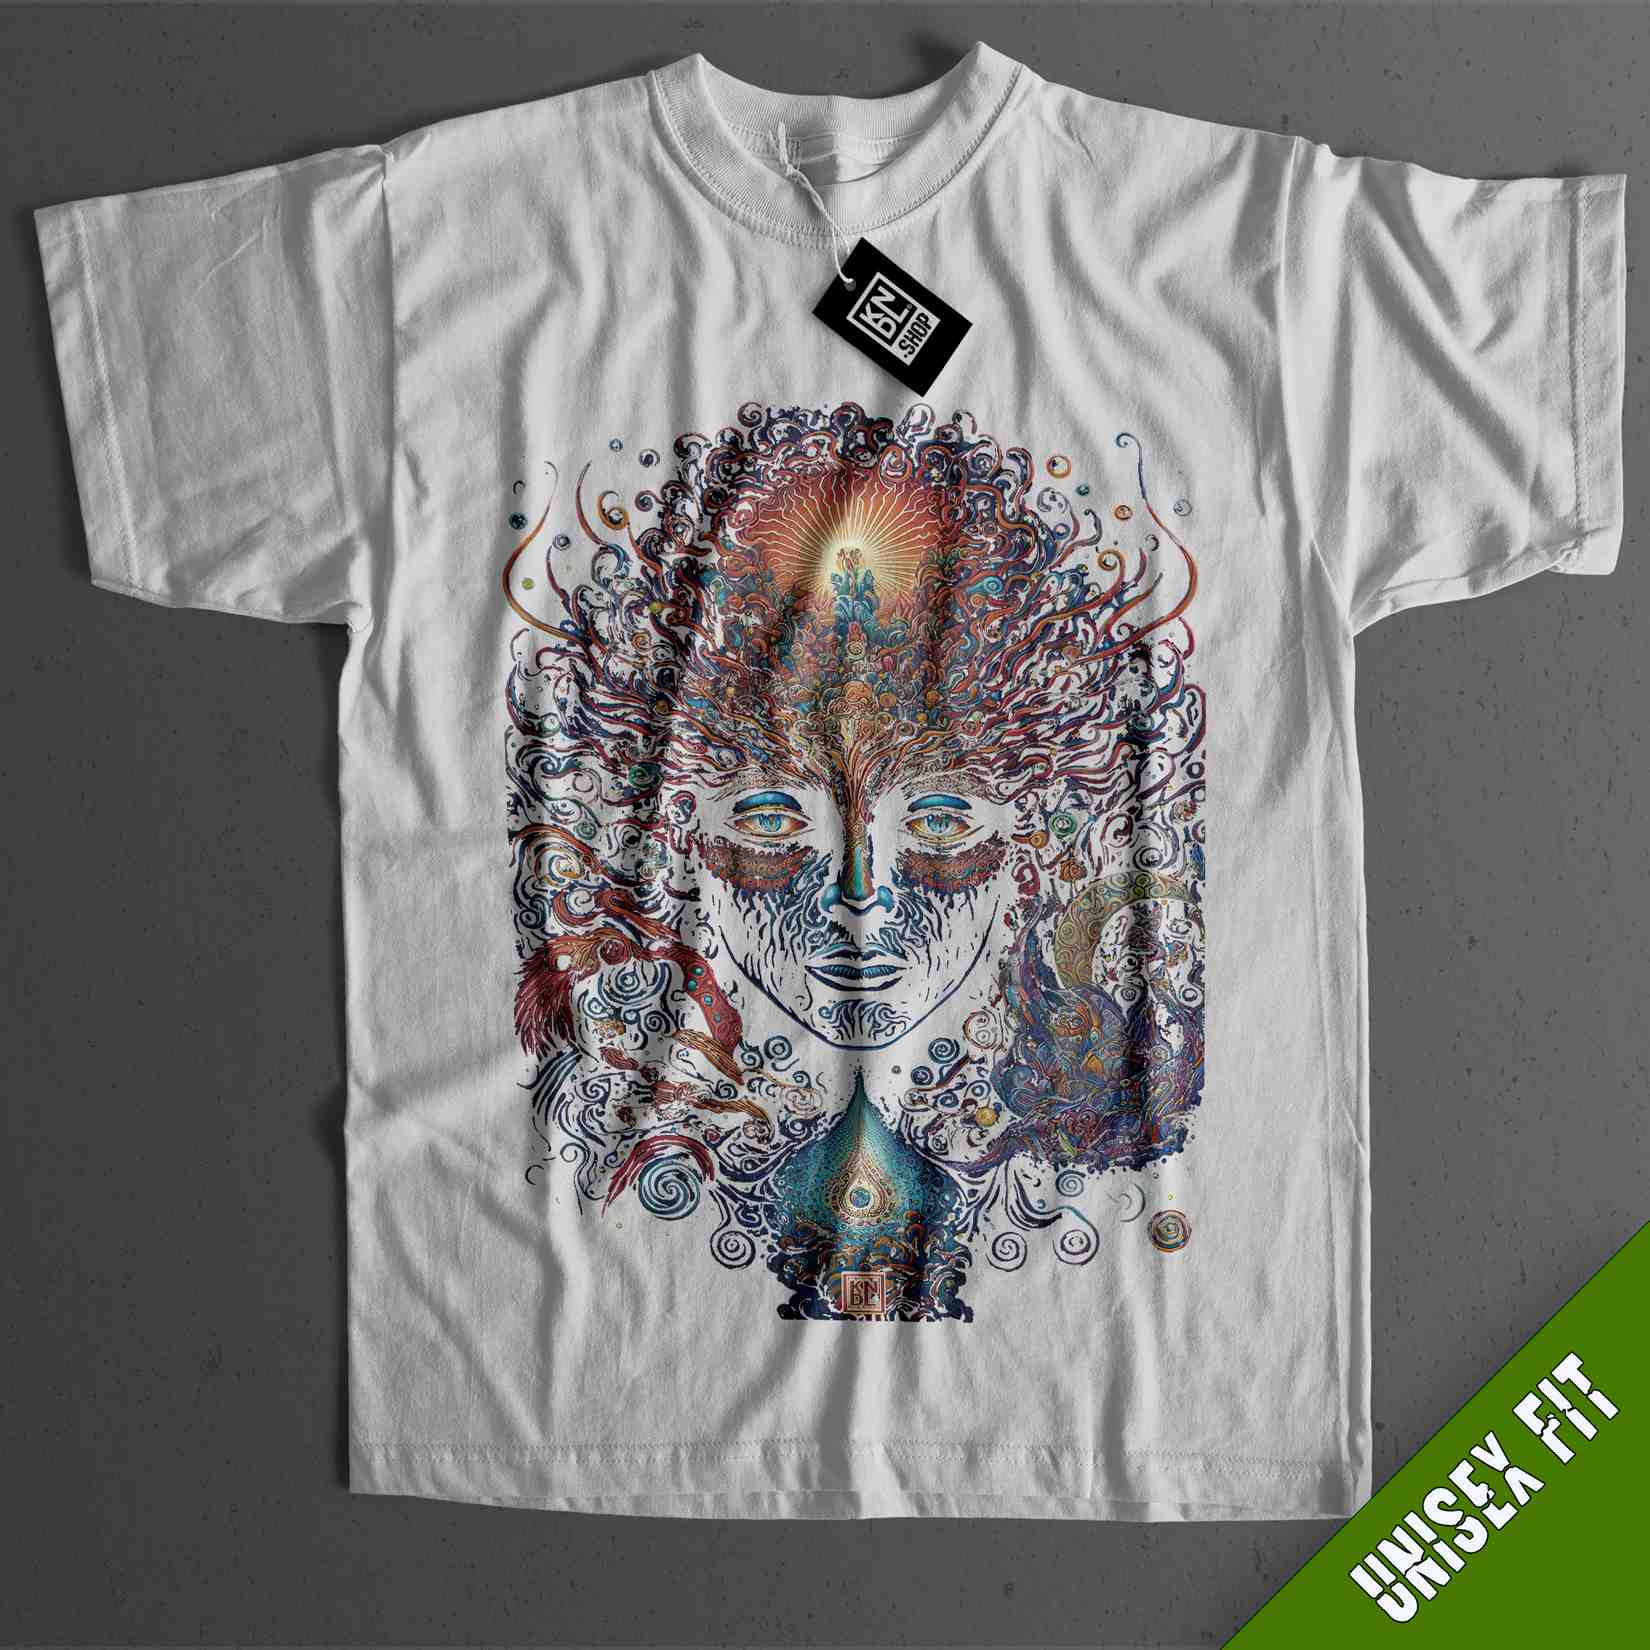 a white t - shirt with an image of a woman's face